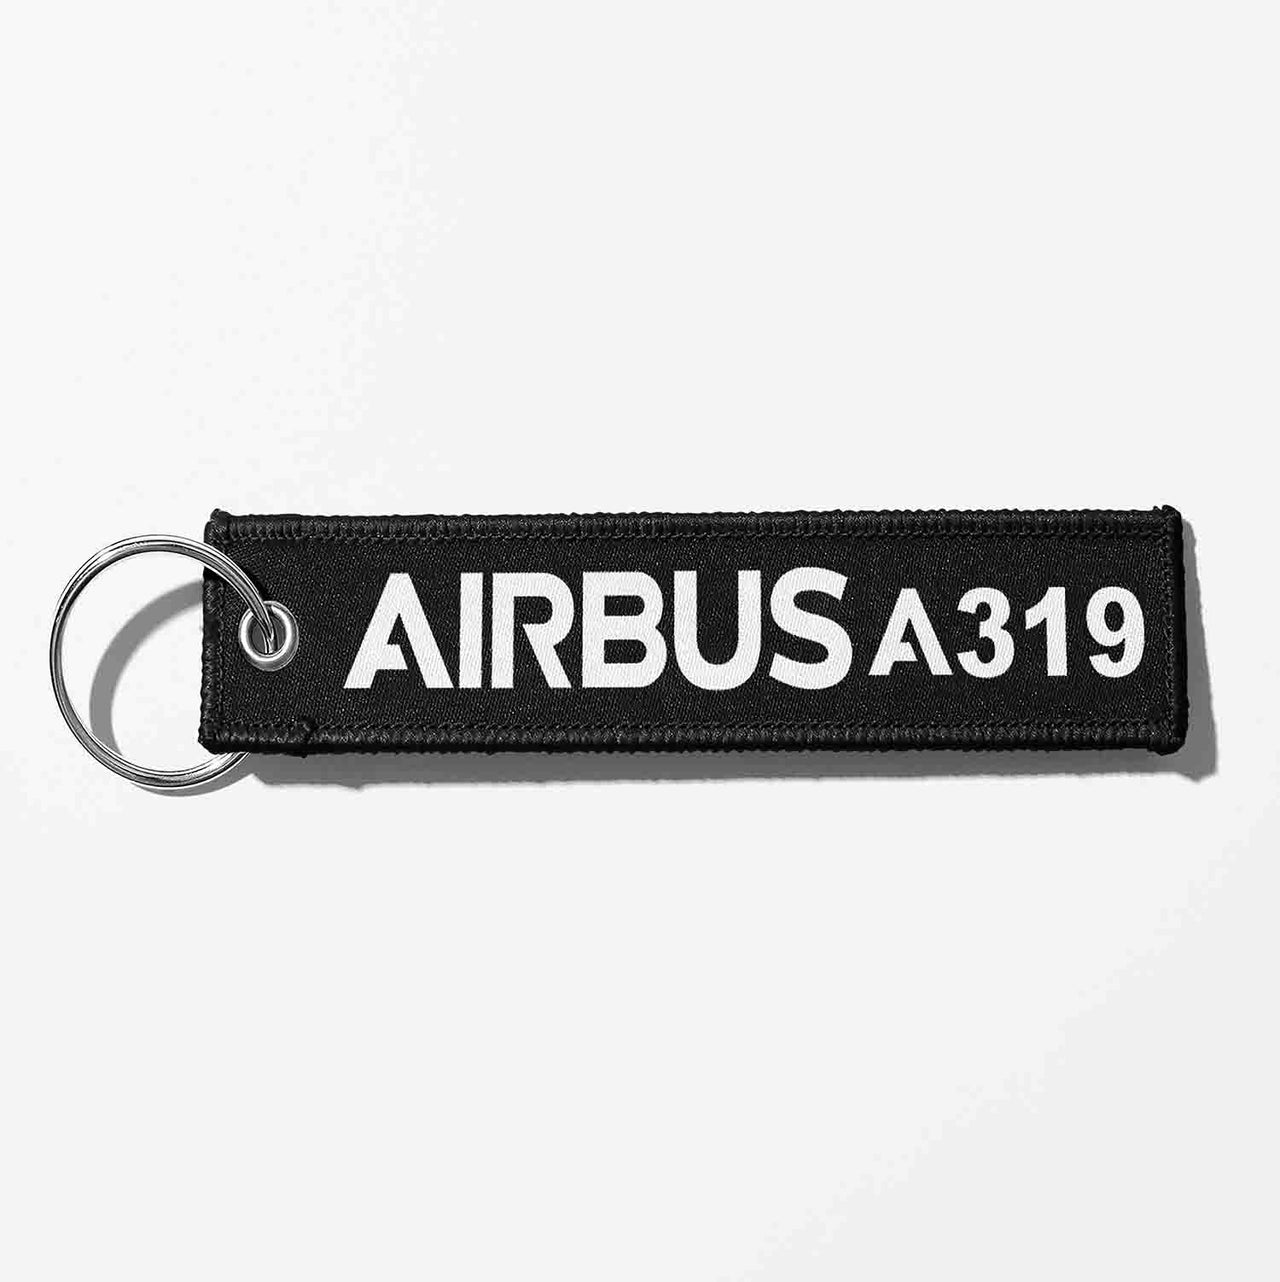 Airbus A319 & Text Designed Key Chains